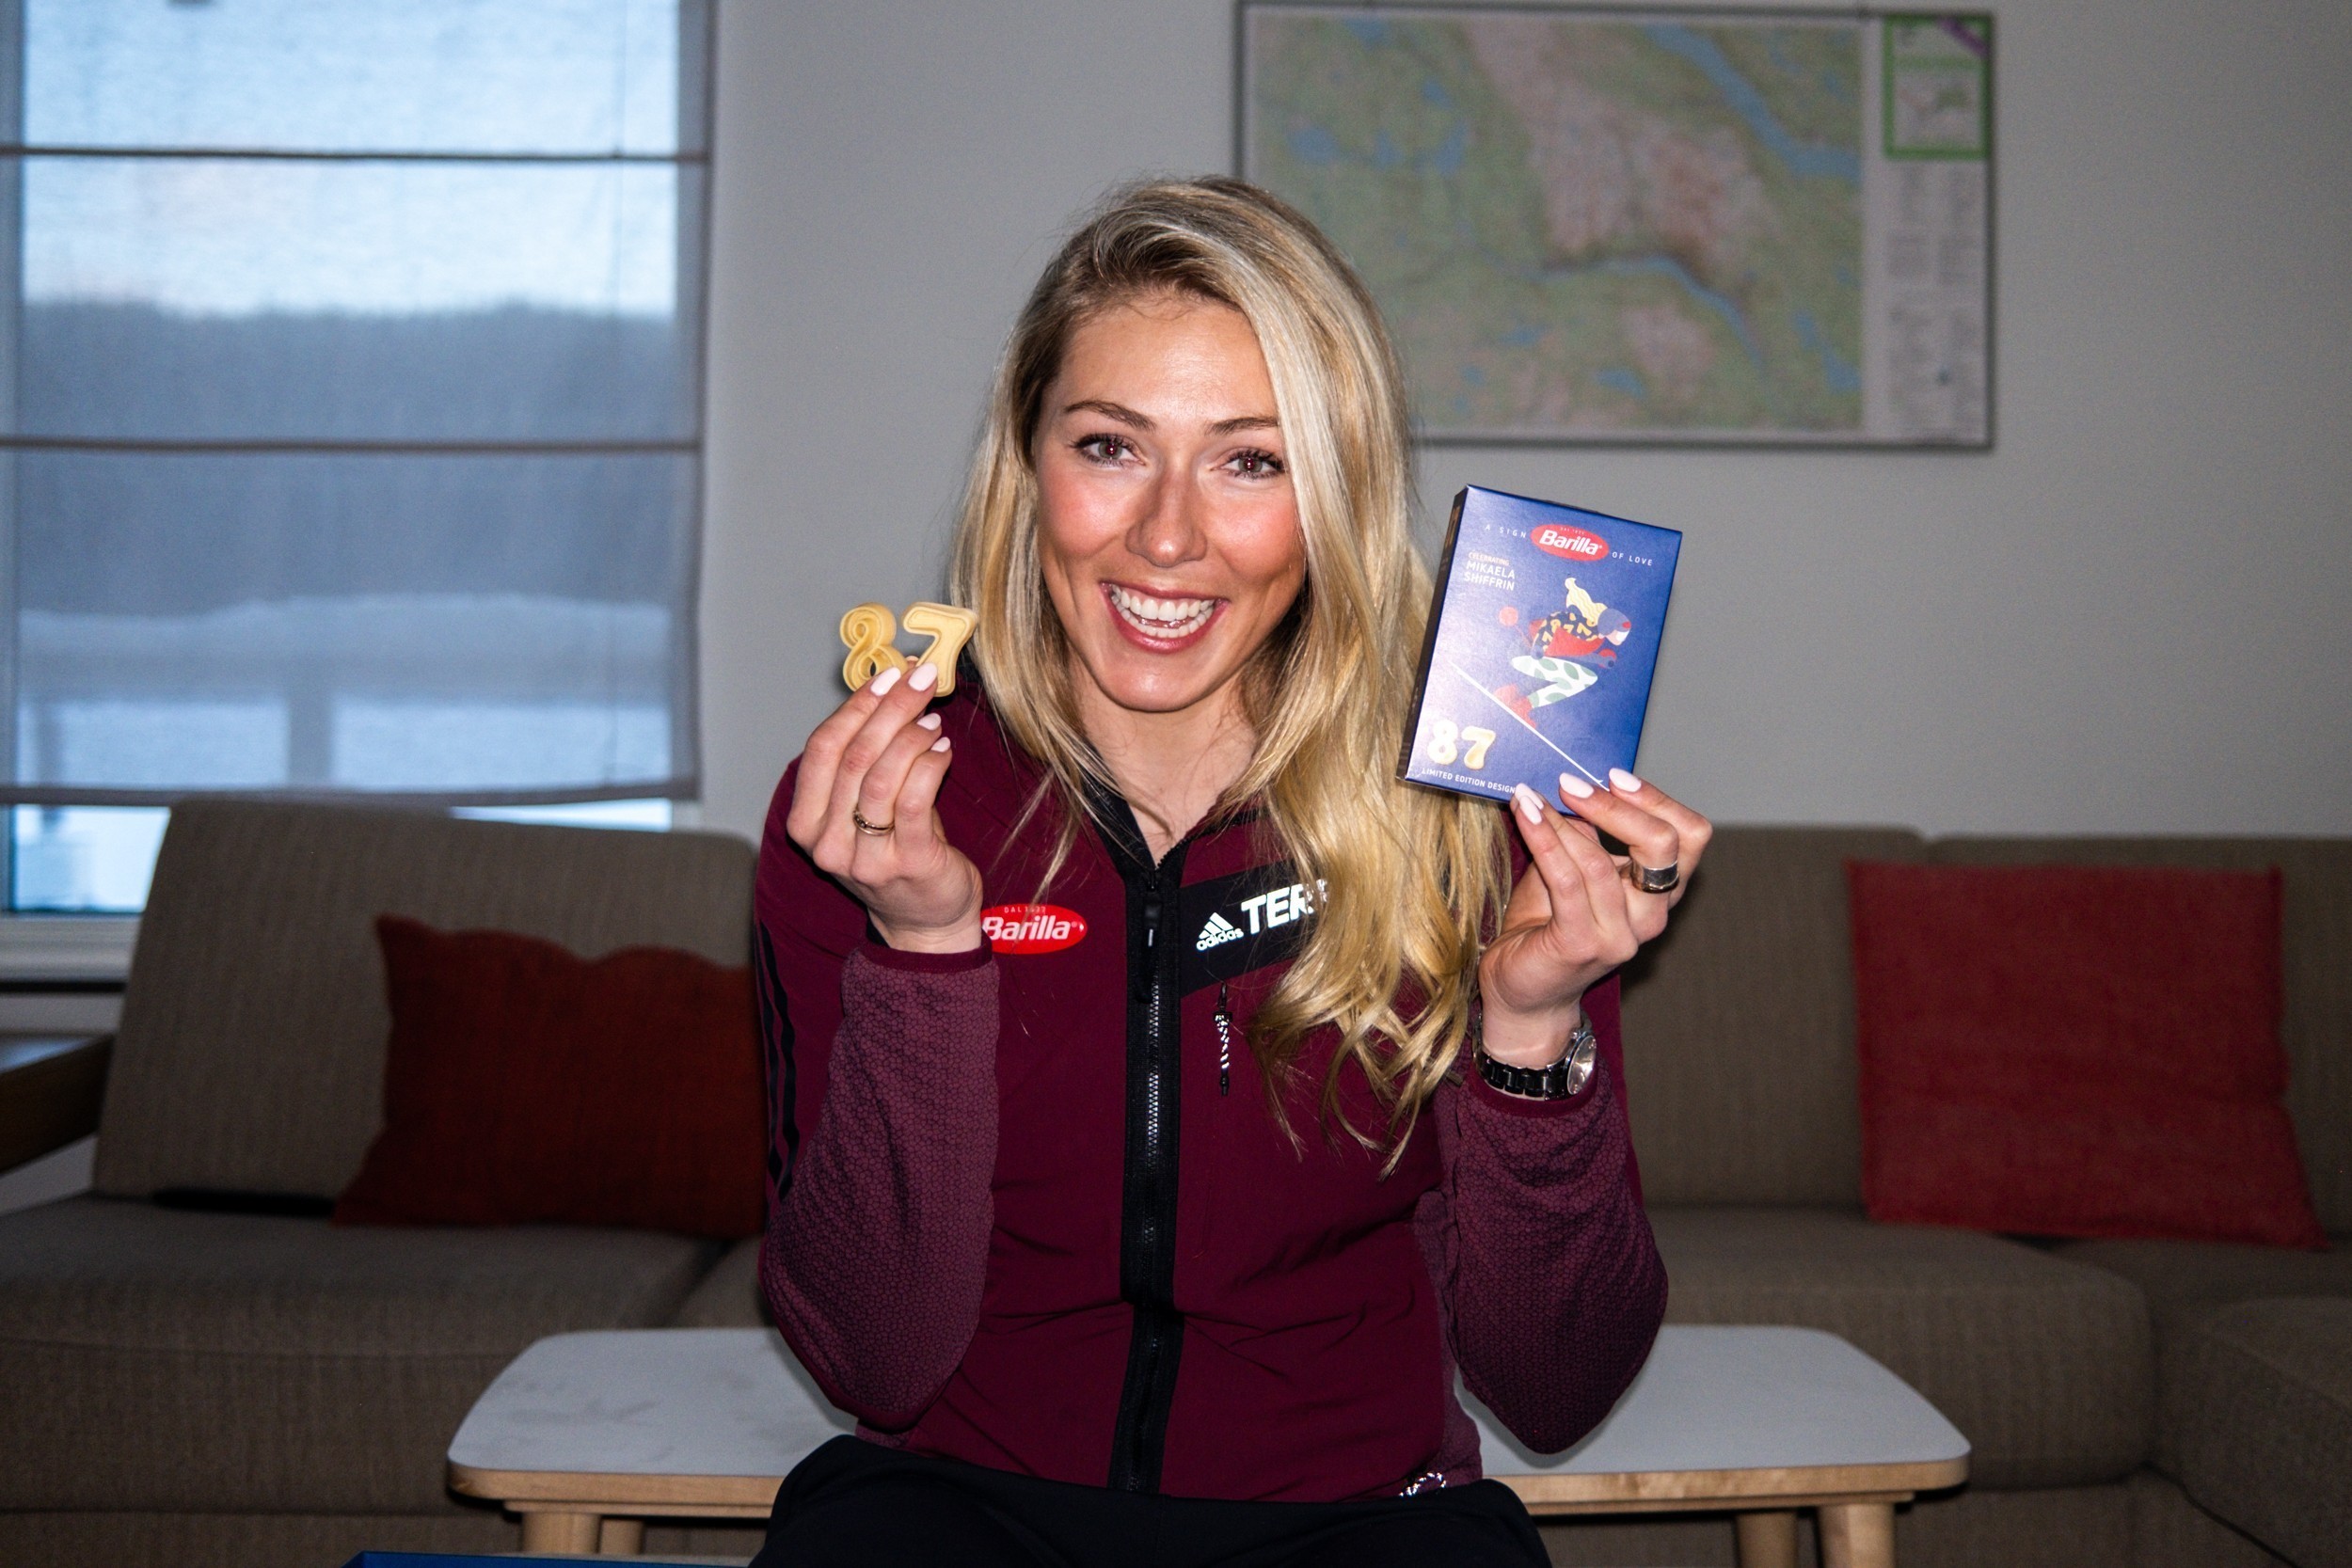 Mikaela Shiffrin with the limited edition pasta package celebrating her victory